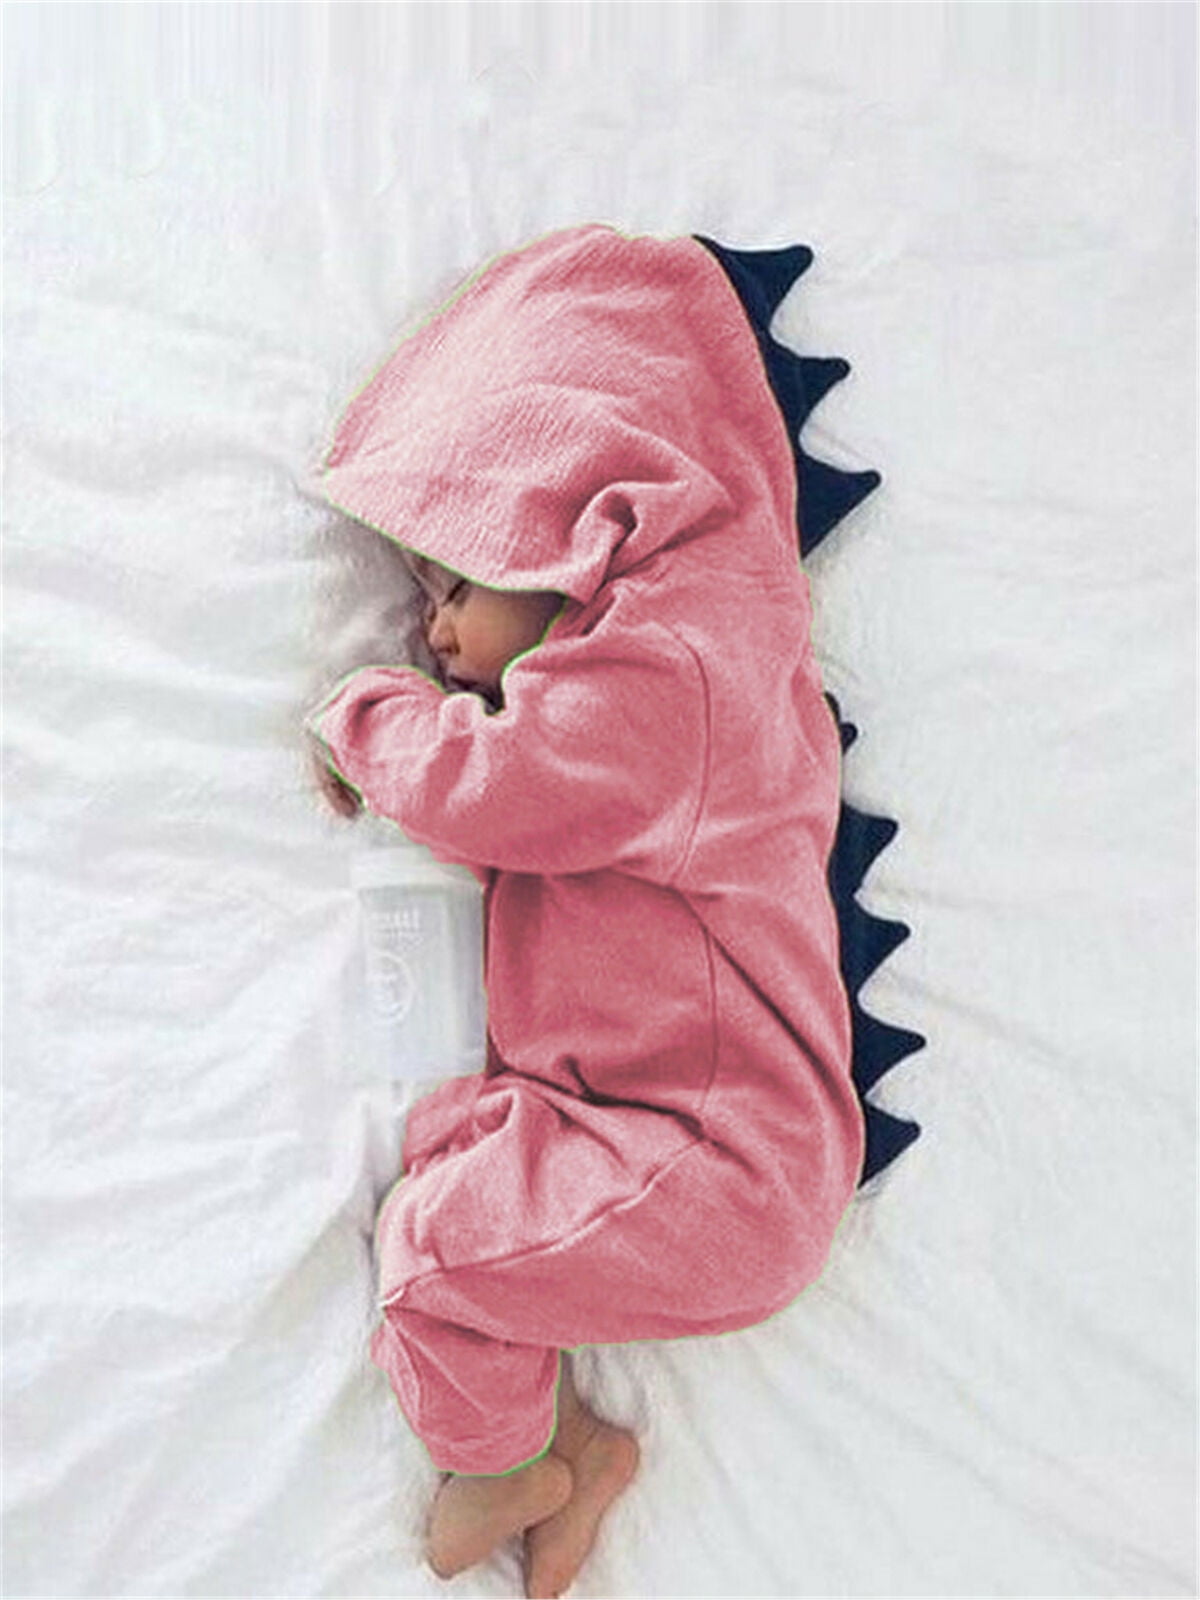 XIAXAIXU Newborn Baby Boys Girls Cute Long Sleeve Button Knitted Ribbed Warm One Piece Romper Jumpsuit Bodysuit Outfits